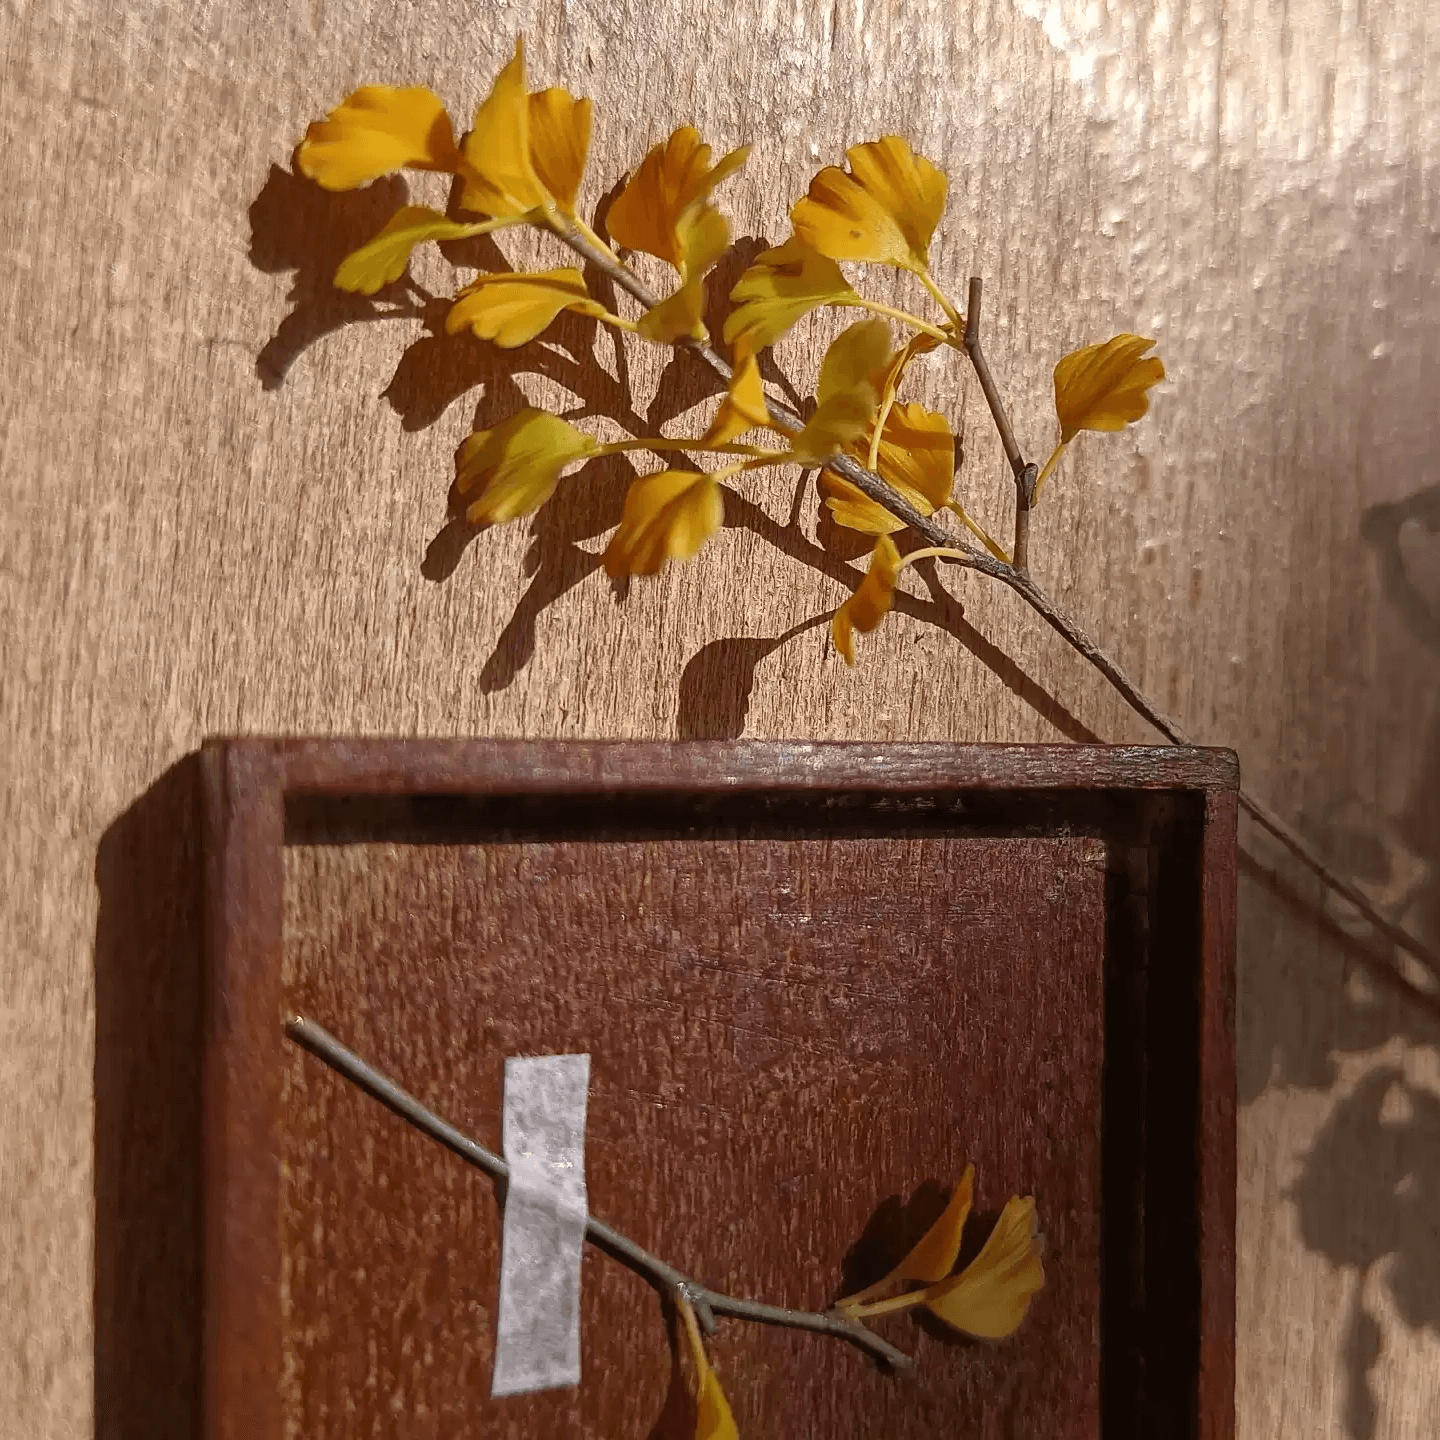 Ginkgo biloba, commonly known as ginkgo or gingko also known as the maidenhair tree, is a species of gymnosperm tree native to East Asia.  Scale: 1:6; 1:12  Material: Handmade from Clay